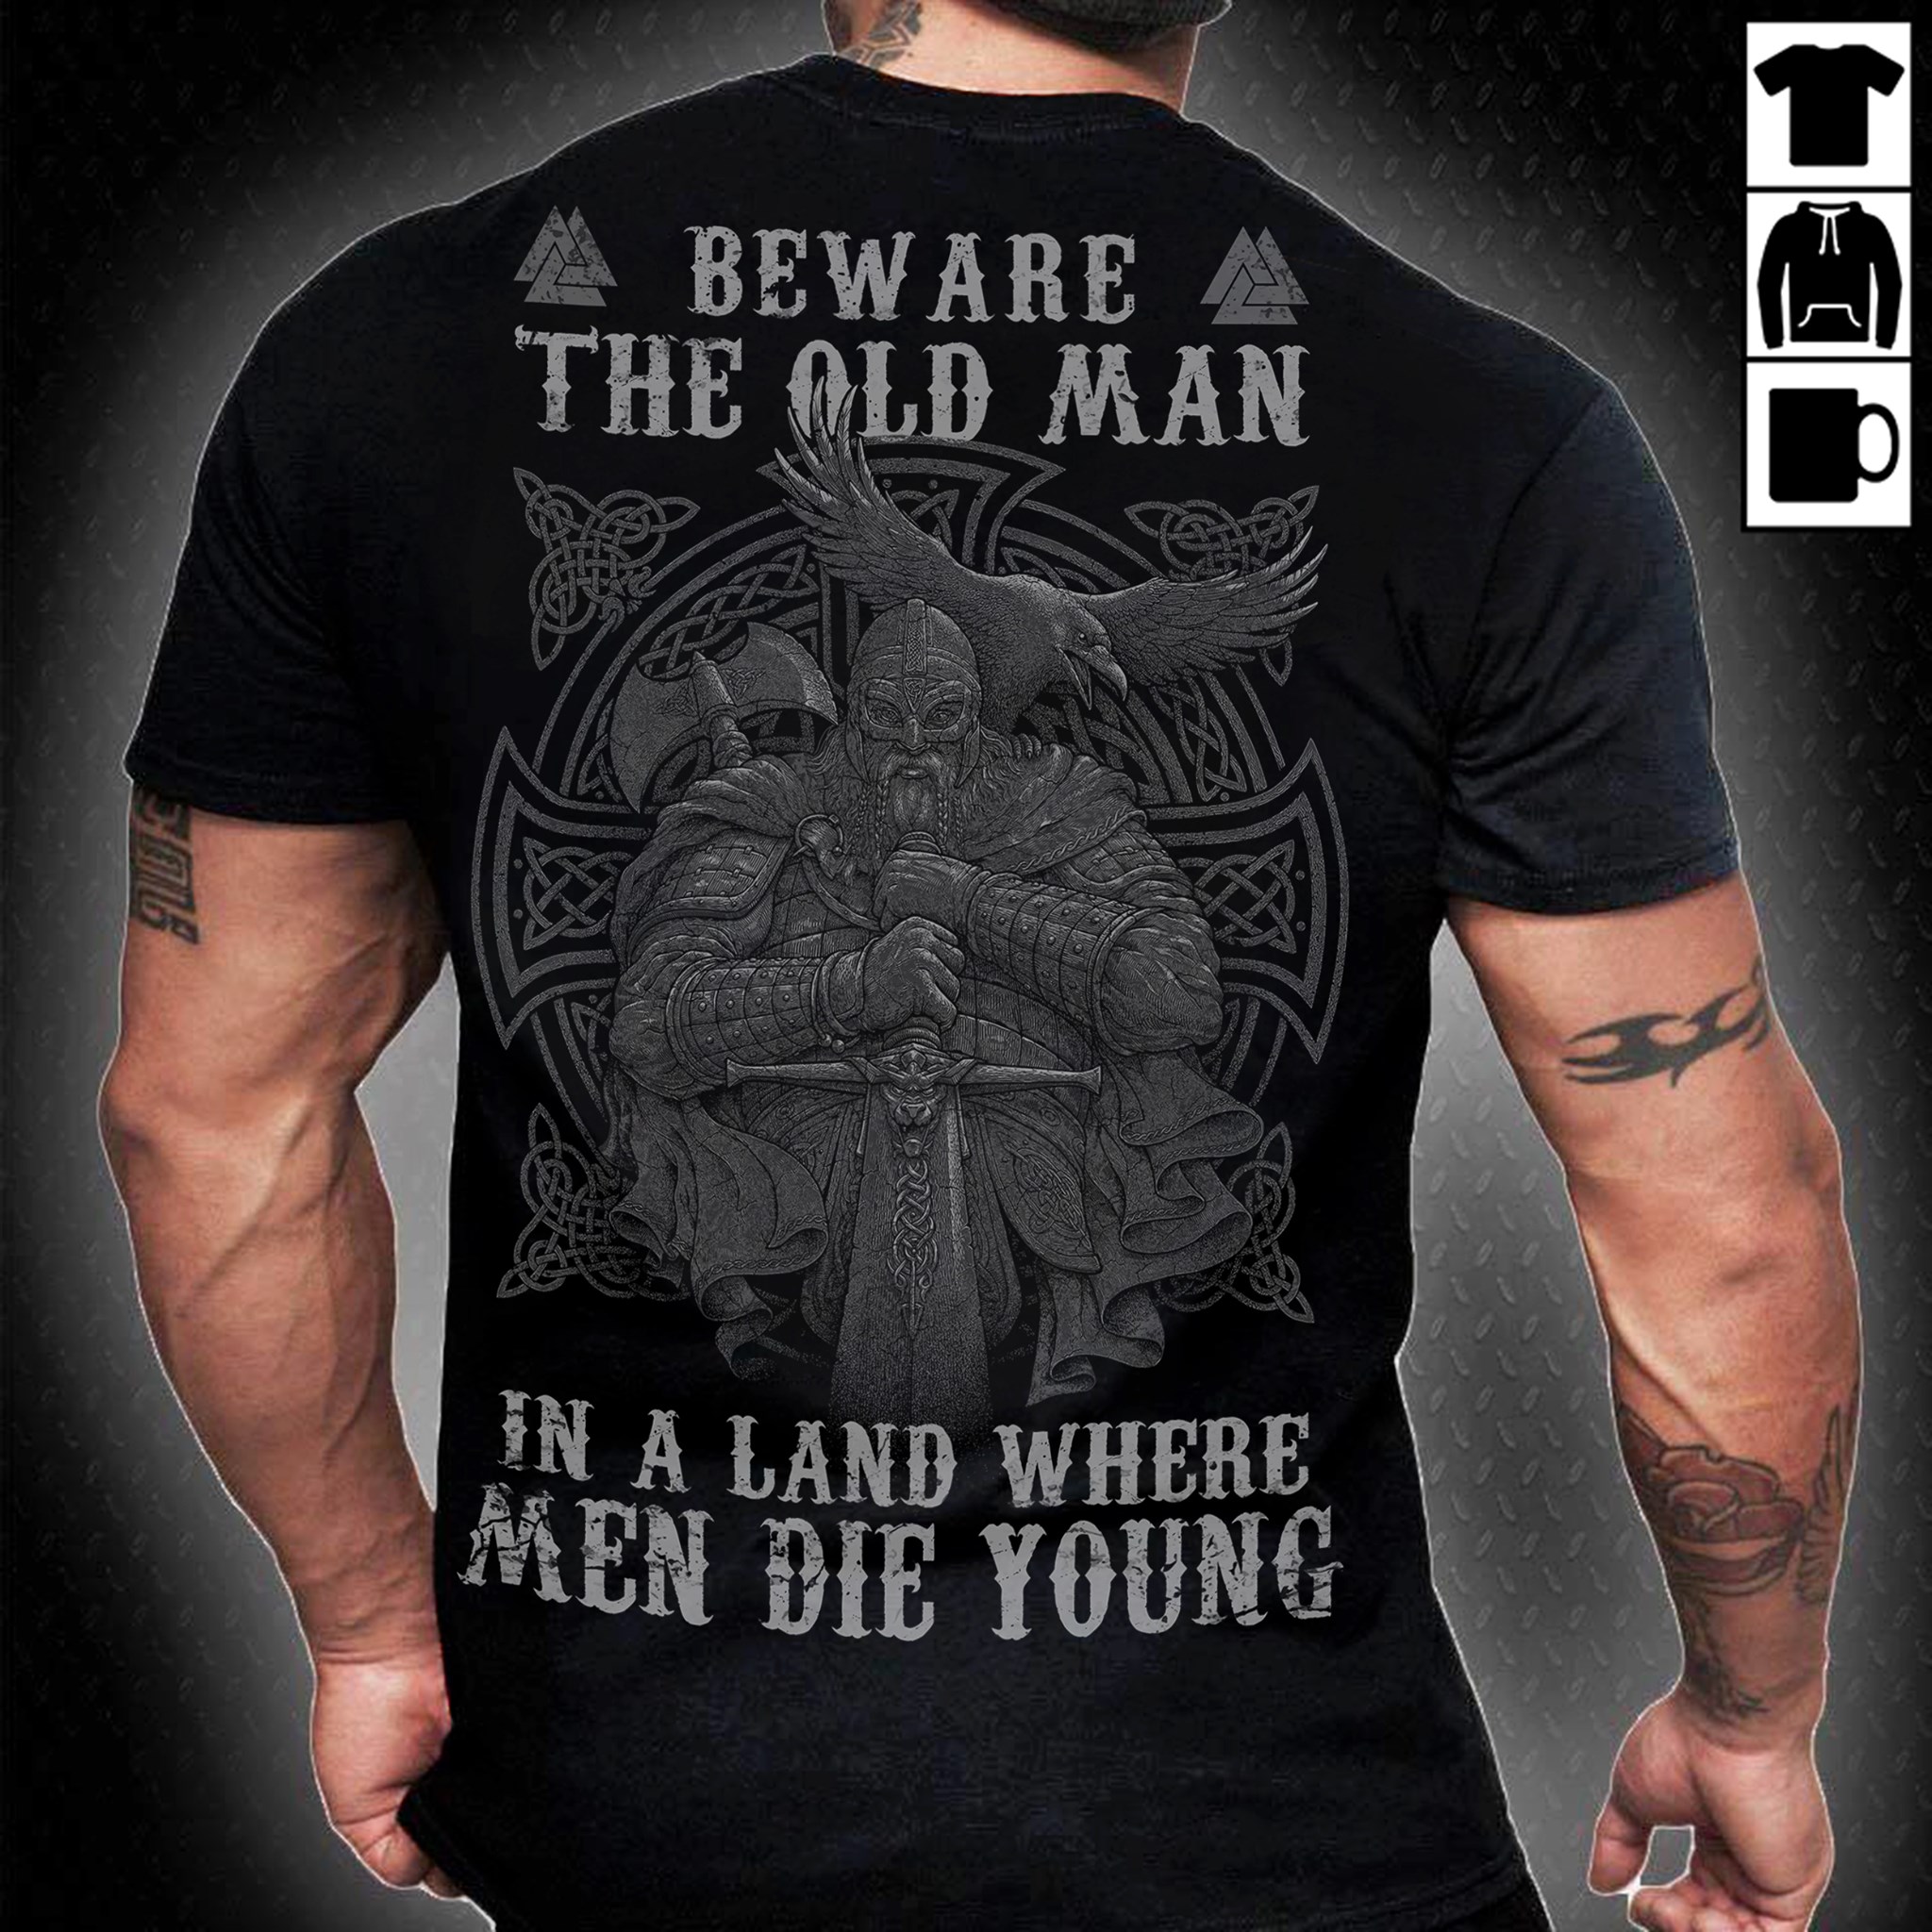 Beware the old man in a land where men die young - Vikings art